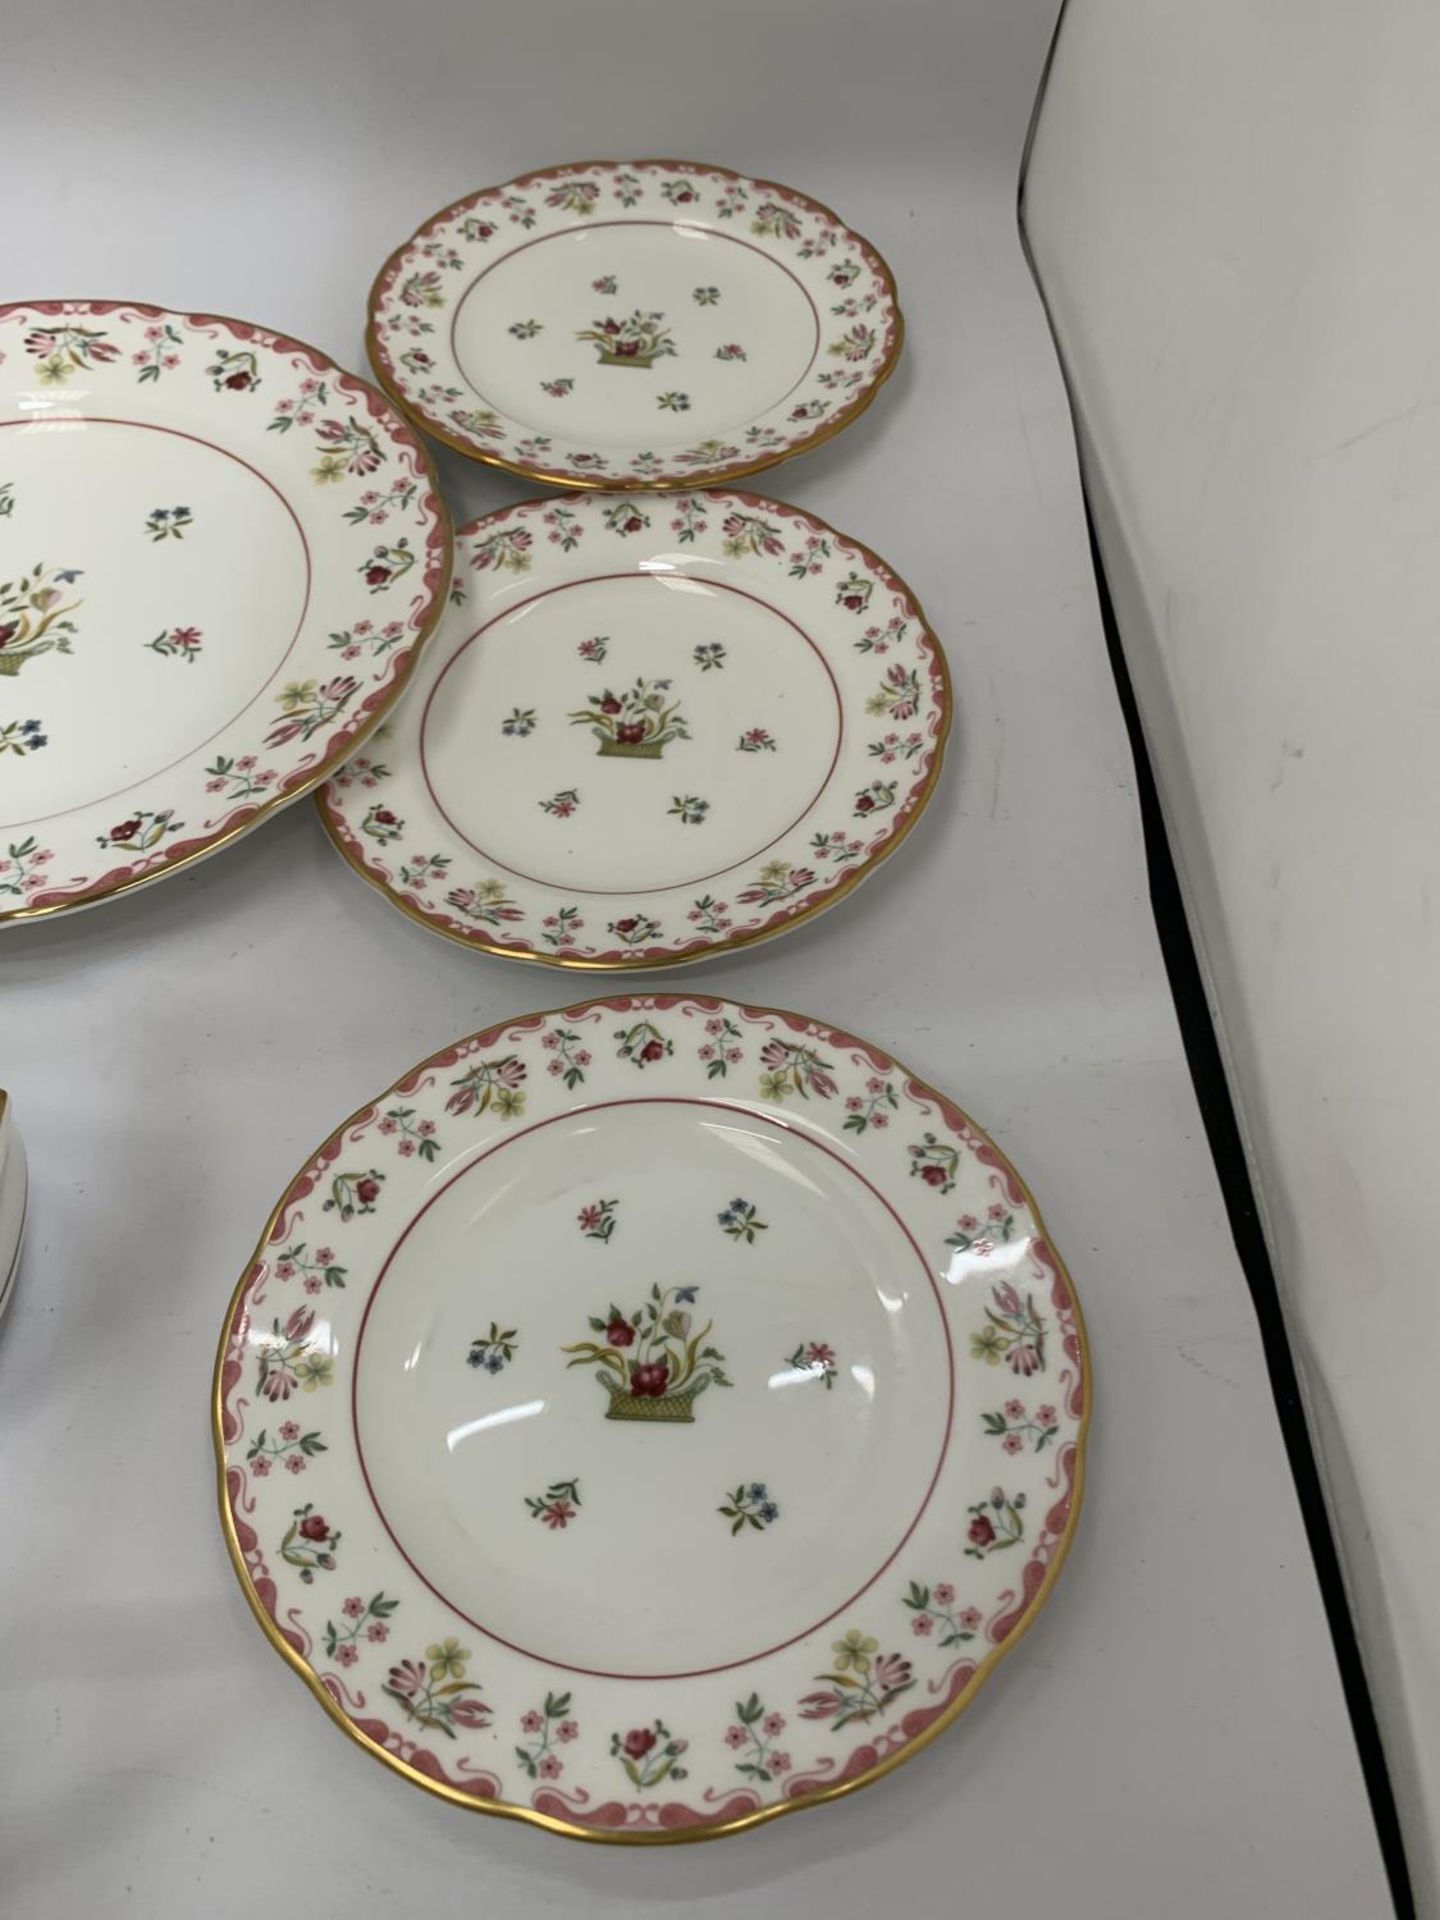 A QUANTITY OF WEDGWOOD 'BIANCA' TO INCLUDE A CAKE PLATE, SIDE PLATES, CREAM JUG AND SUGAR BOWL - Image 6 of 6